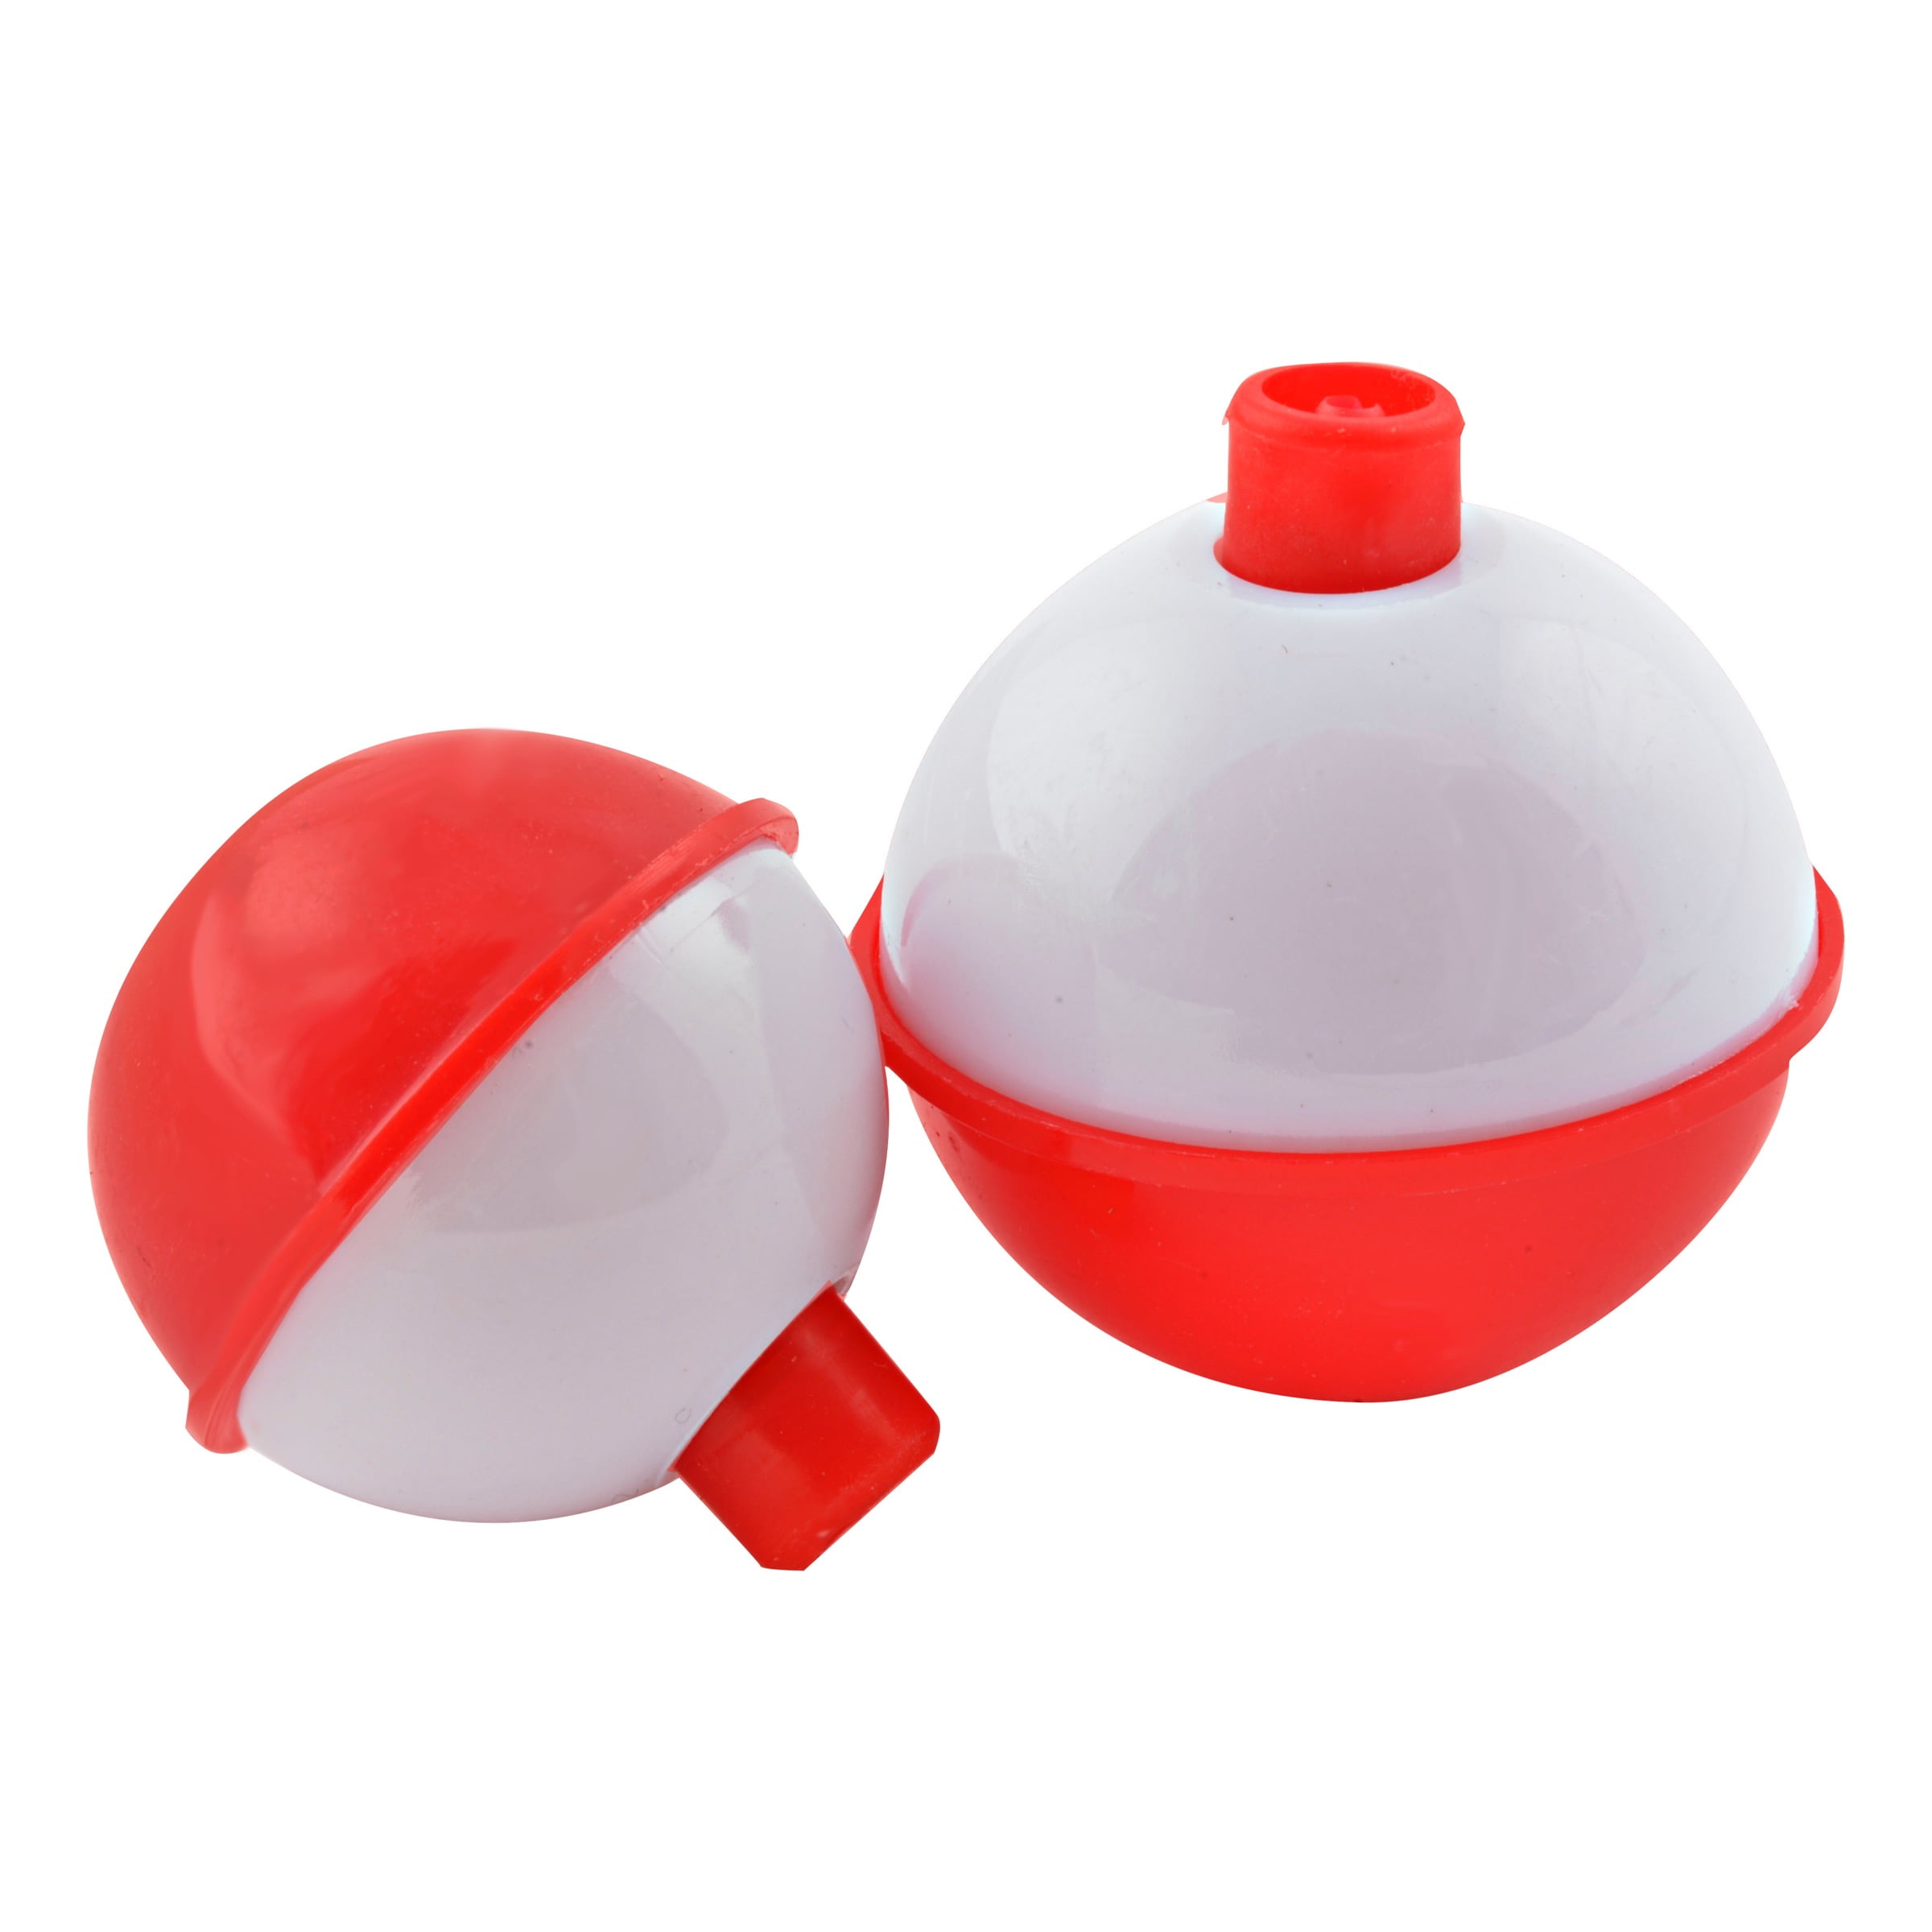 48 .75" FISHING BOBBERS Round Weighted Floats Flo Red White Foam SNAP ON FLOAT 